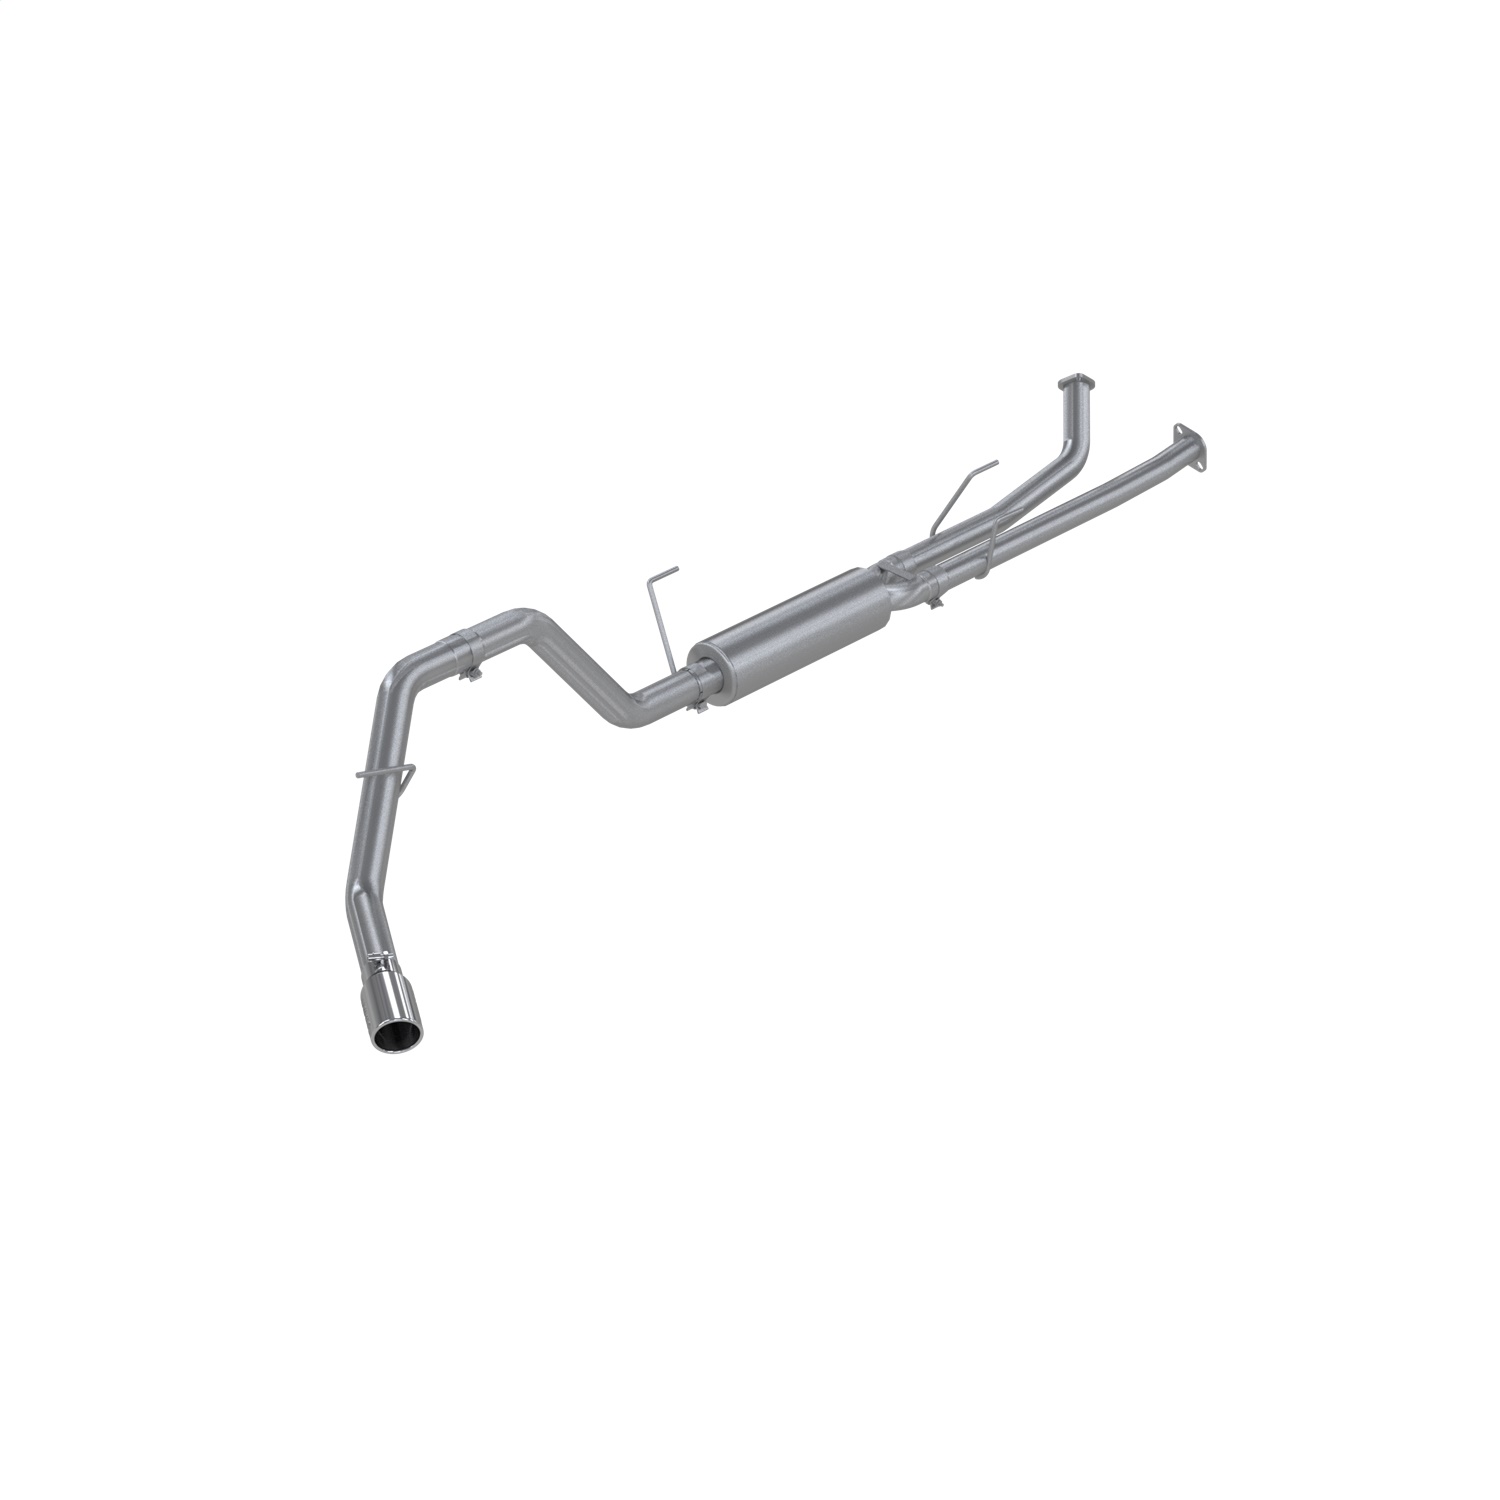 MBRP Exhaust S5304409 Armor Plus Cat Back Exhaust System Fits 07-09 Tundra